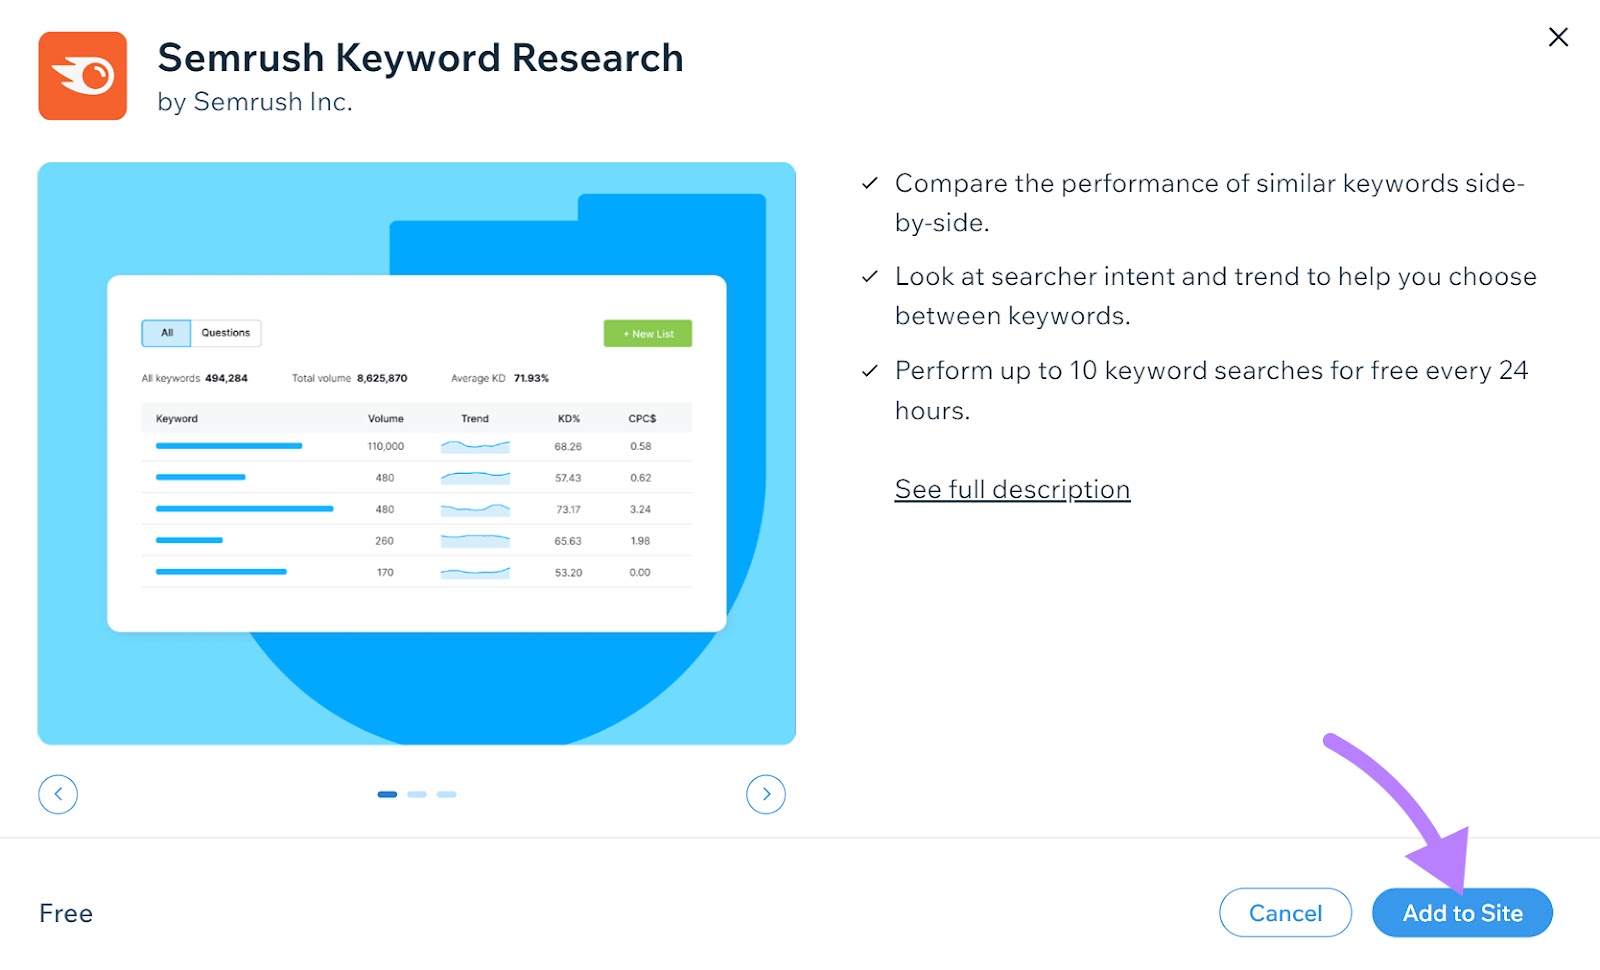 add Semrush Keyword Research to site